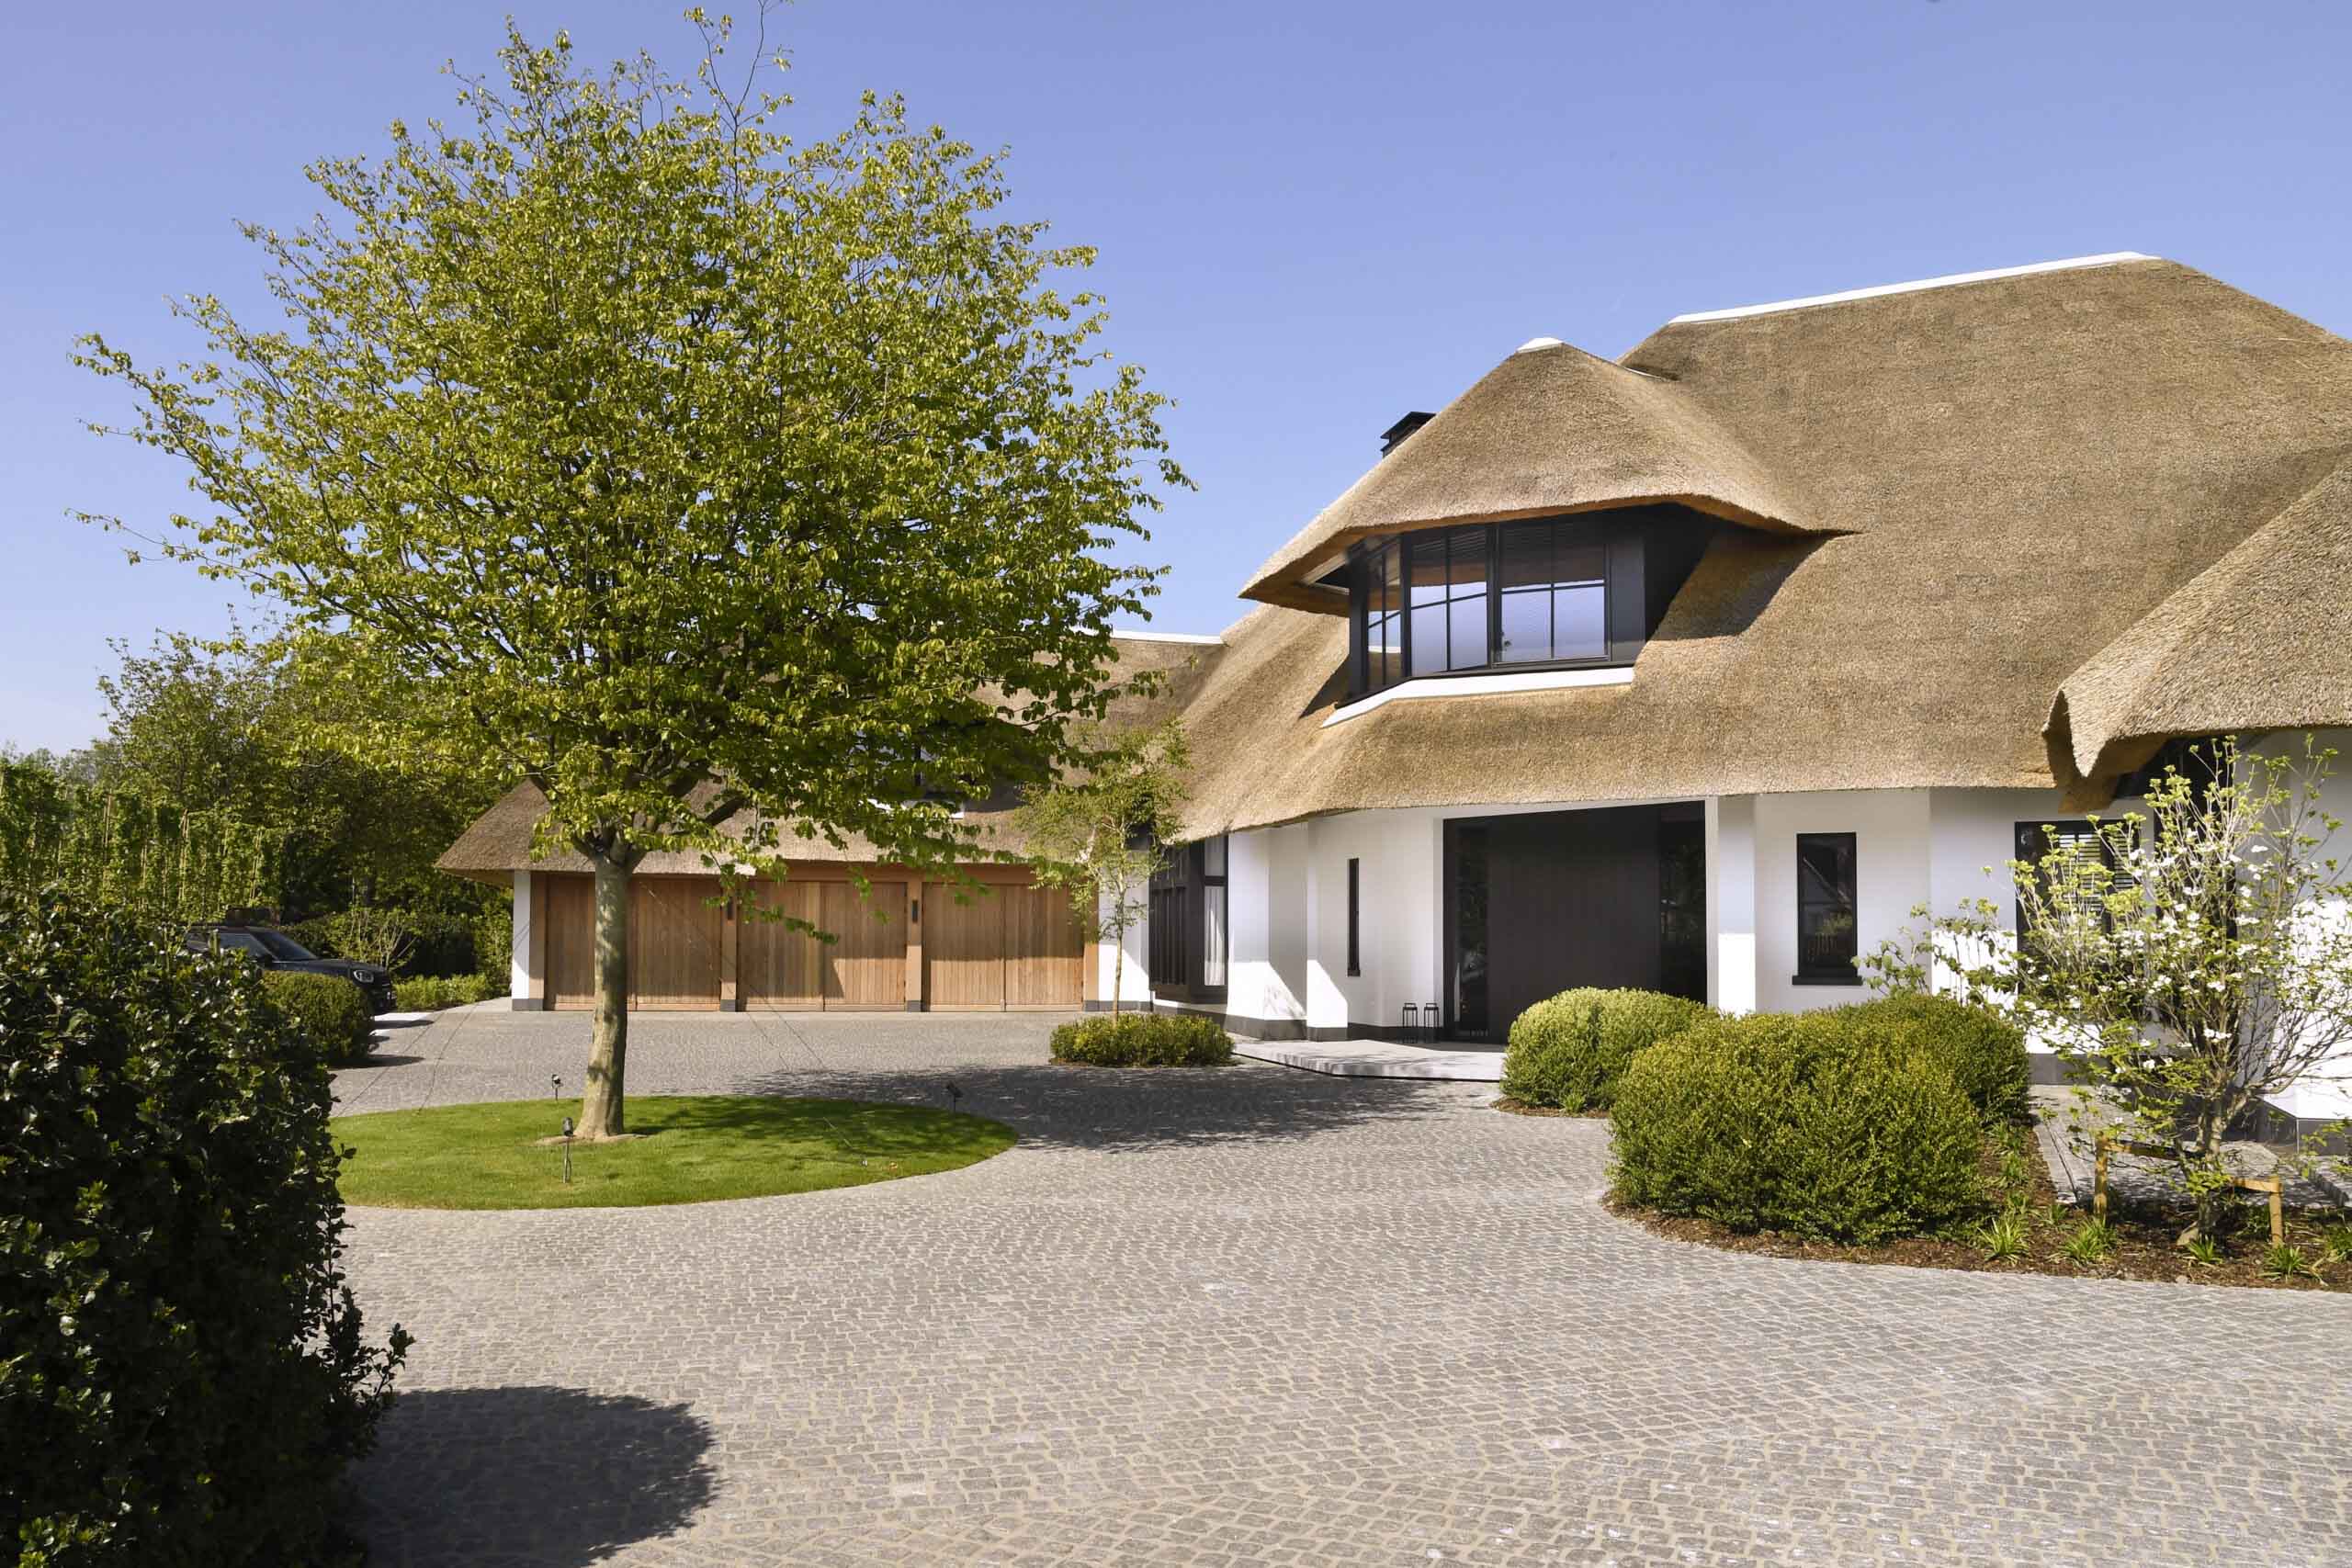 Modern house with thatched roof, cobblestone driveway, and green tree.Modern house with thatched roof, cobblestone driveway, and green tree.